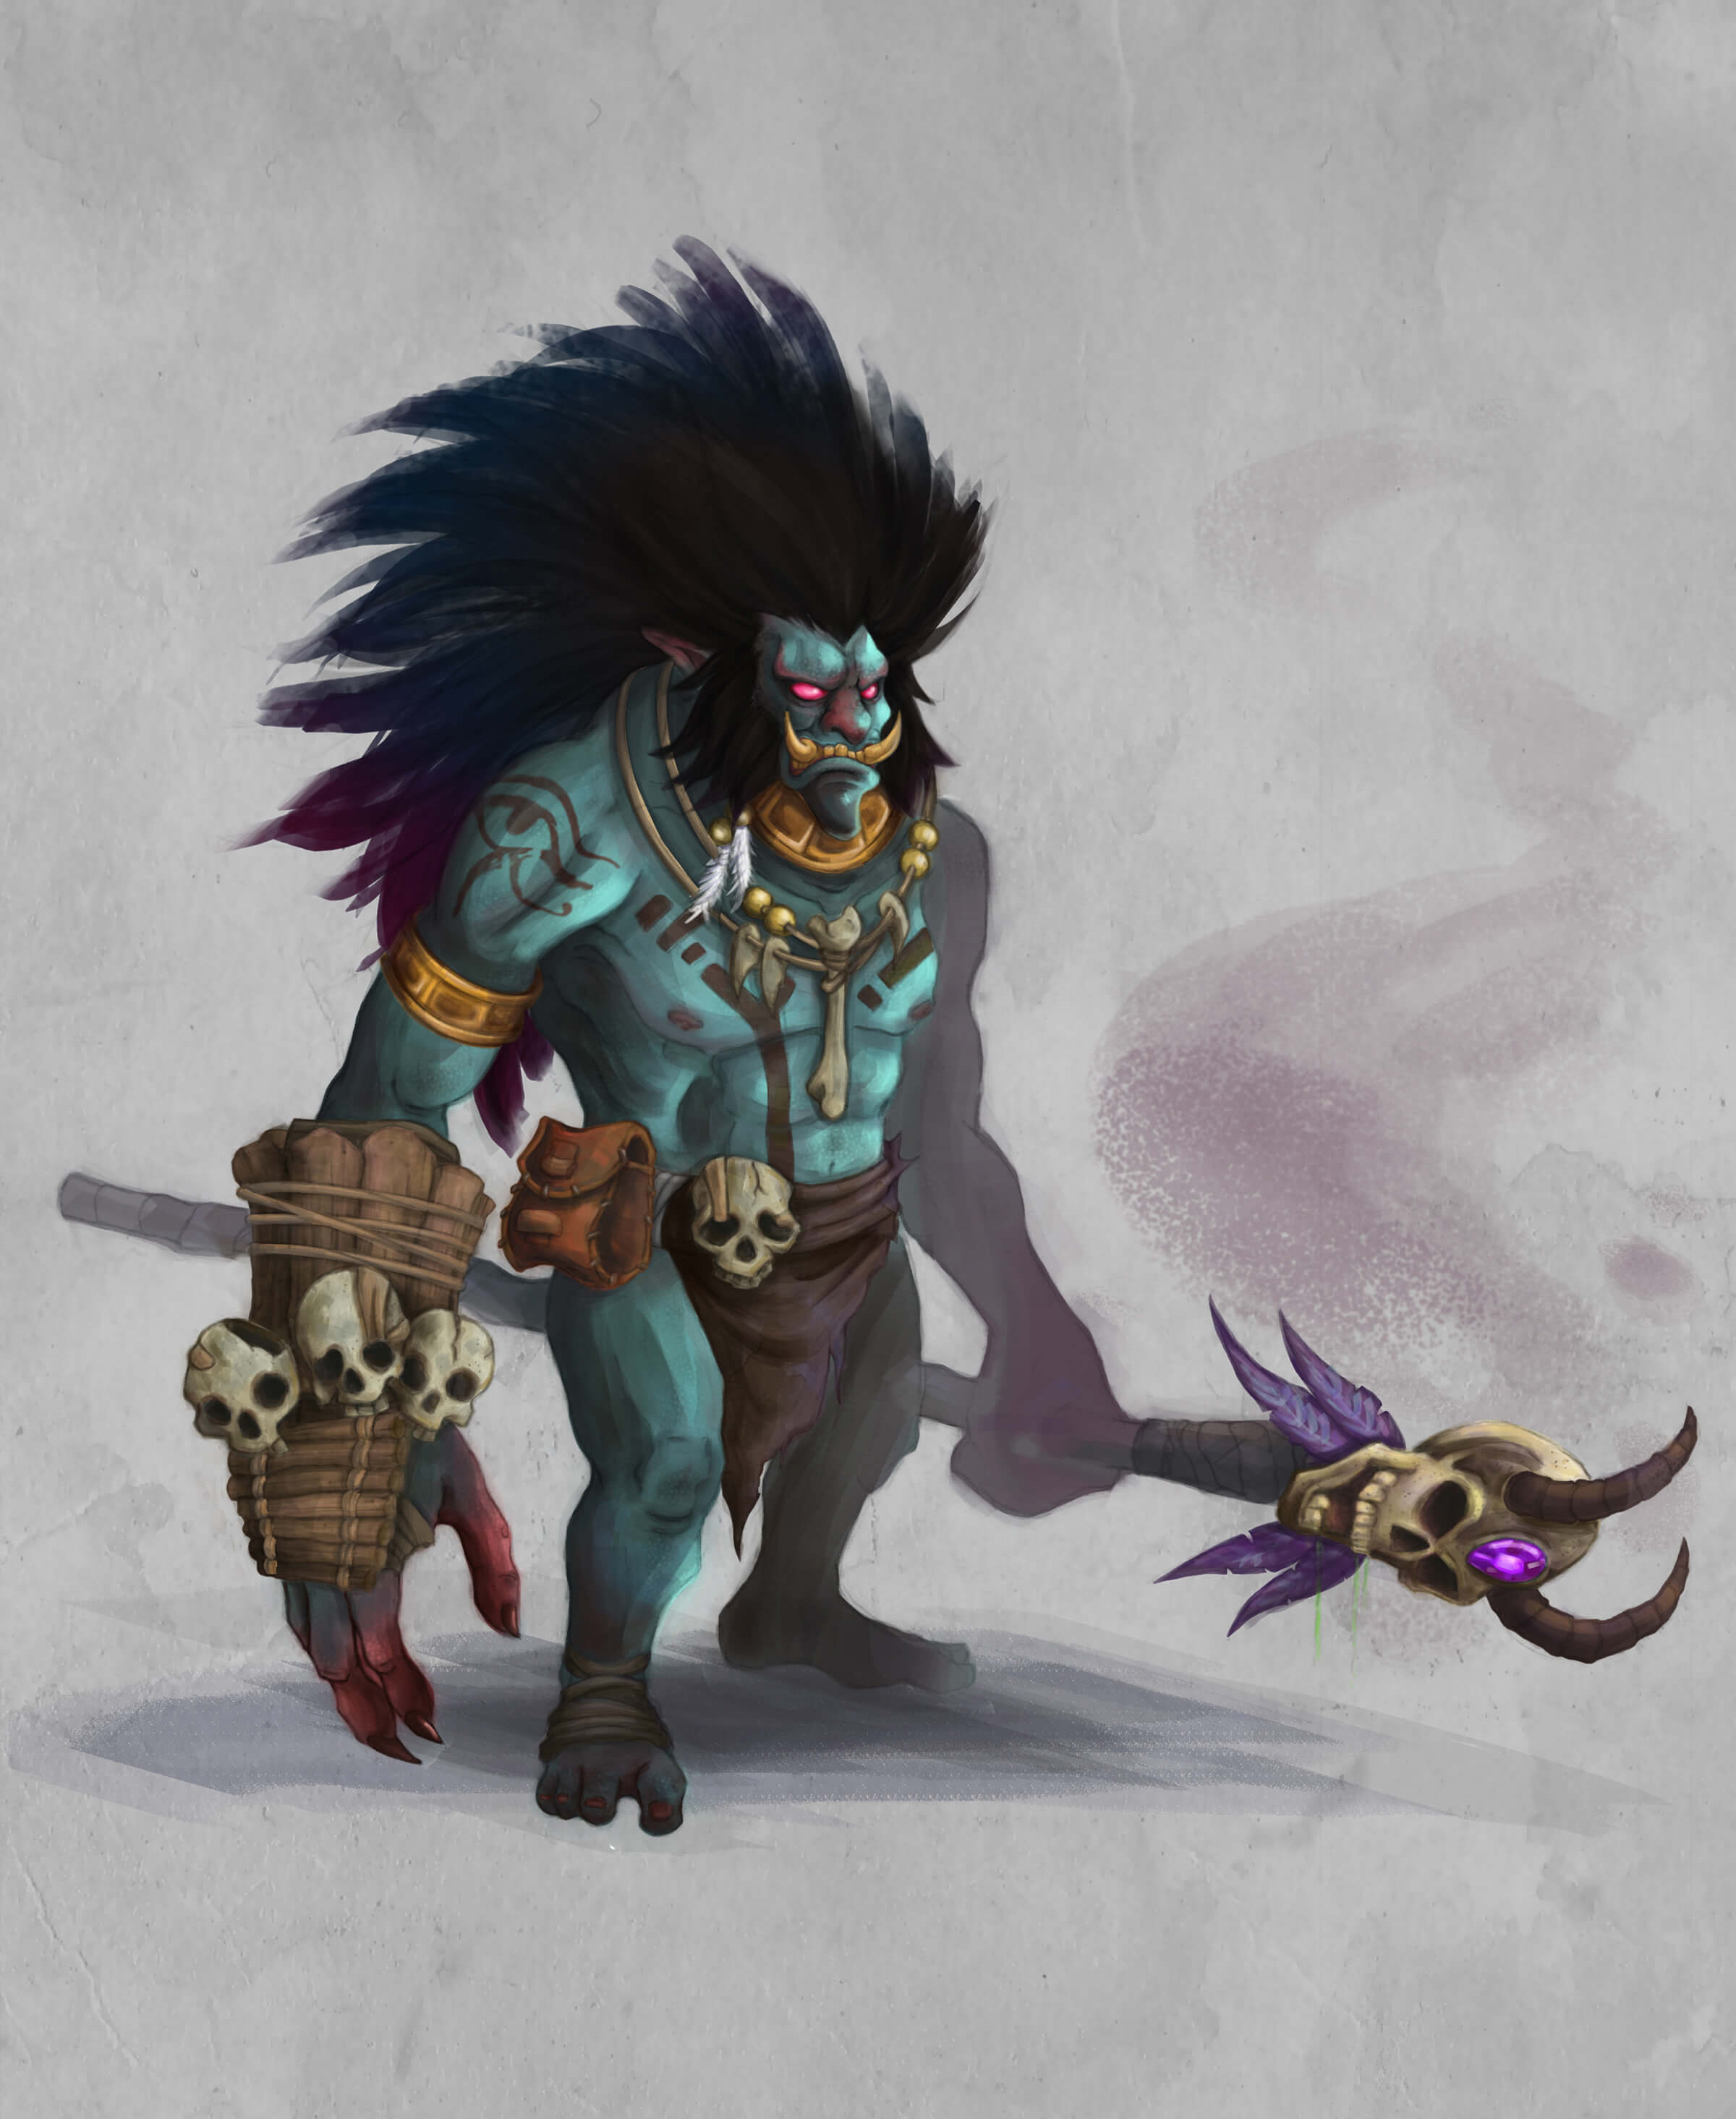 Concept art of a teal-colored monster with the features of a boar and lion, standing in shamanic dress adorned with skulls.